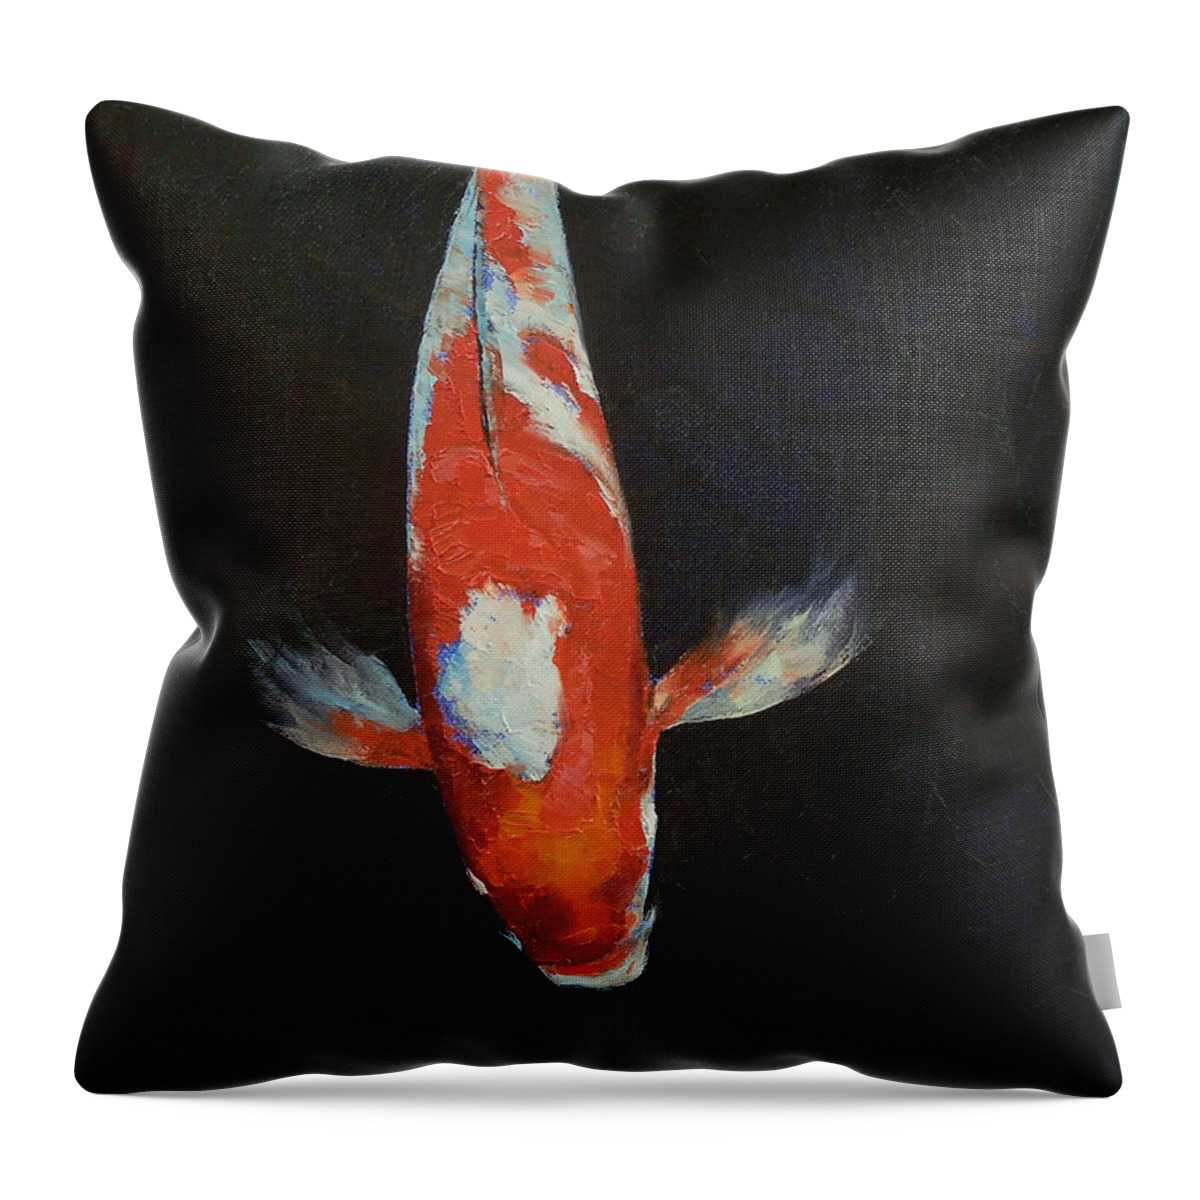 Black Throw Pillow featuring the painting Koi by Michael Creese